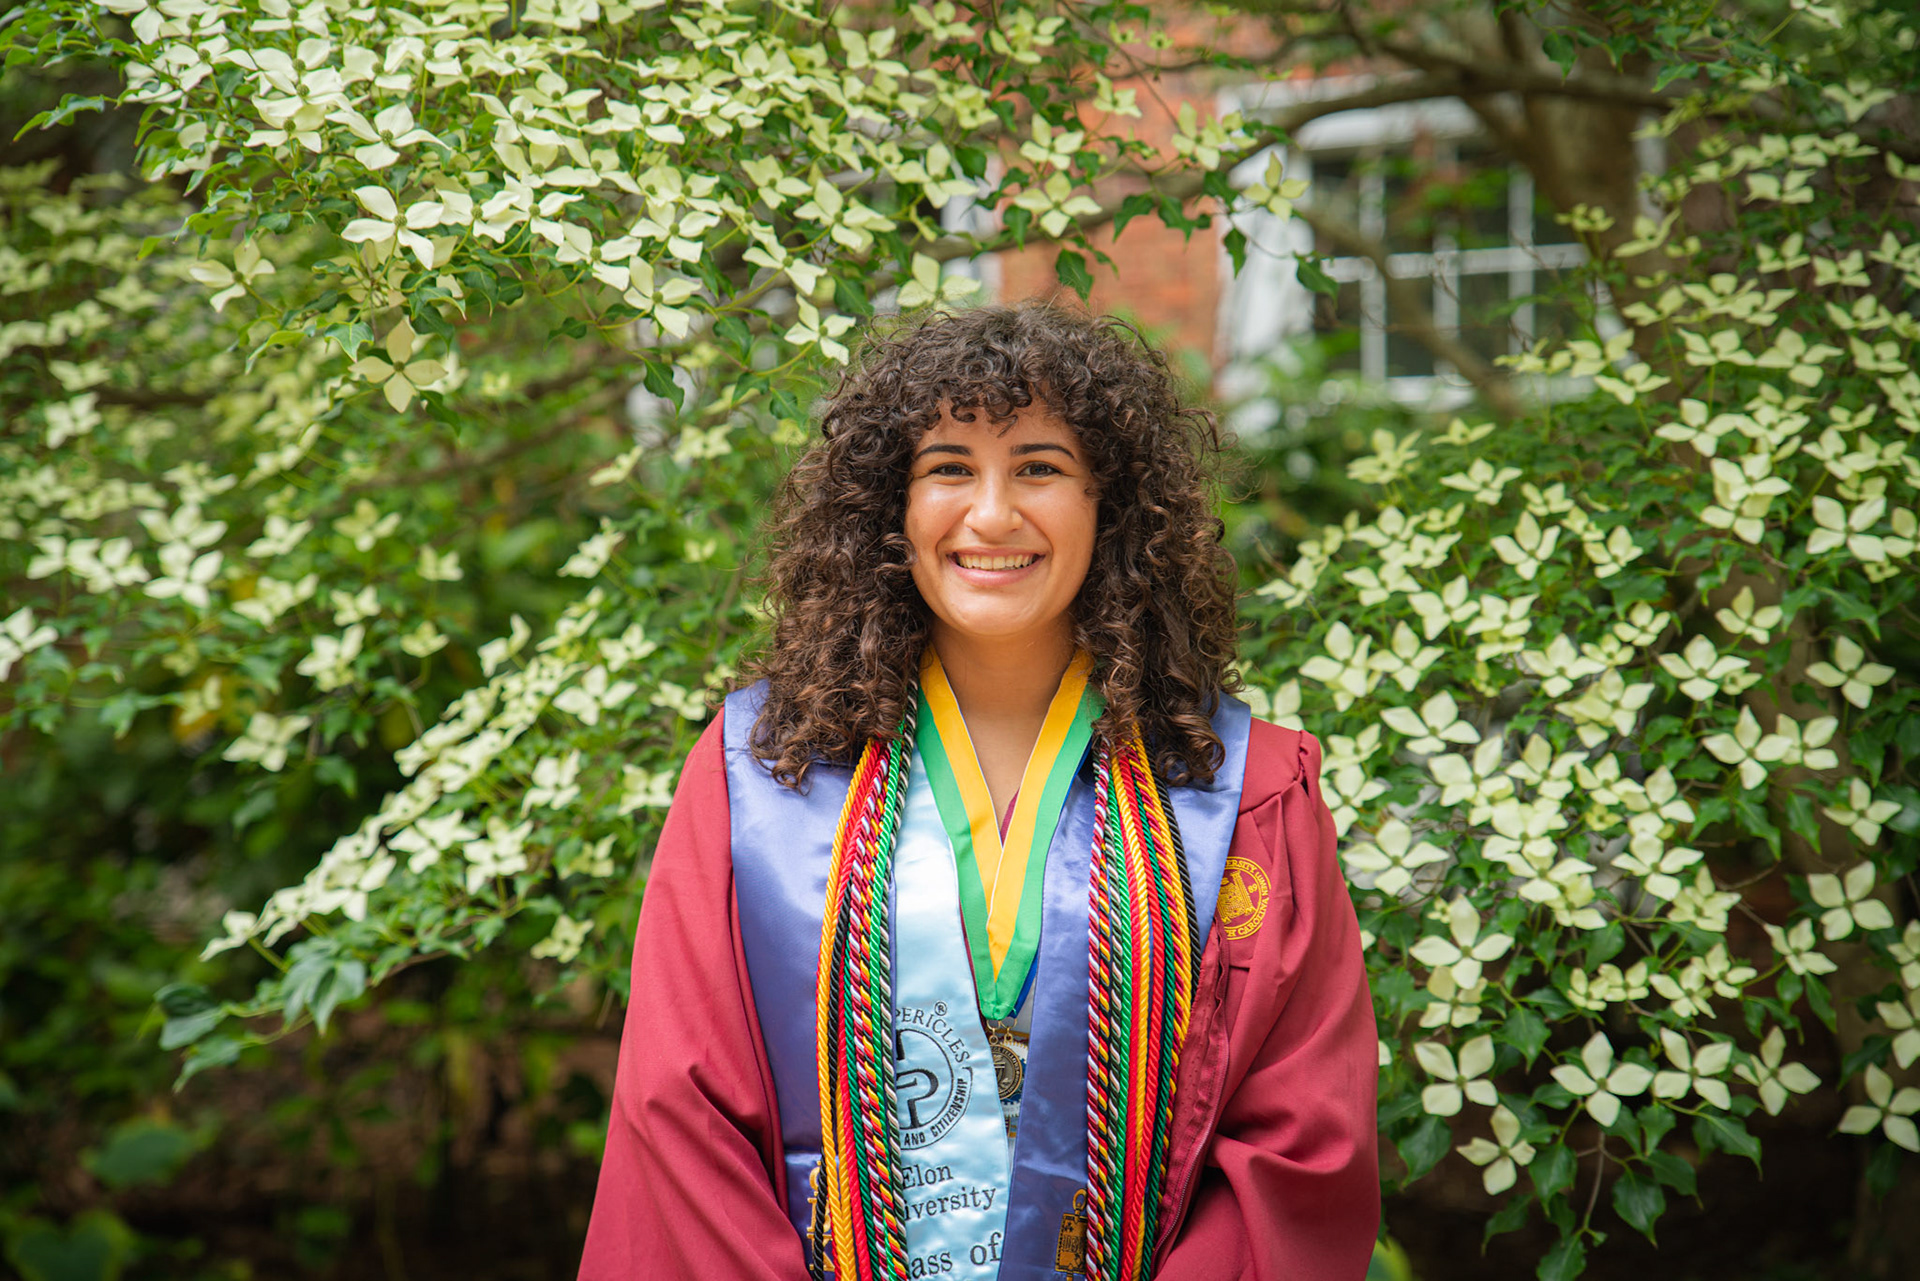 Deena Elrefai in maroon graduation gown with honor cords.